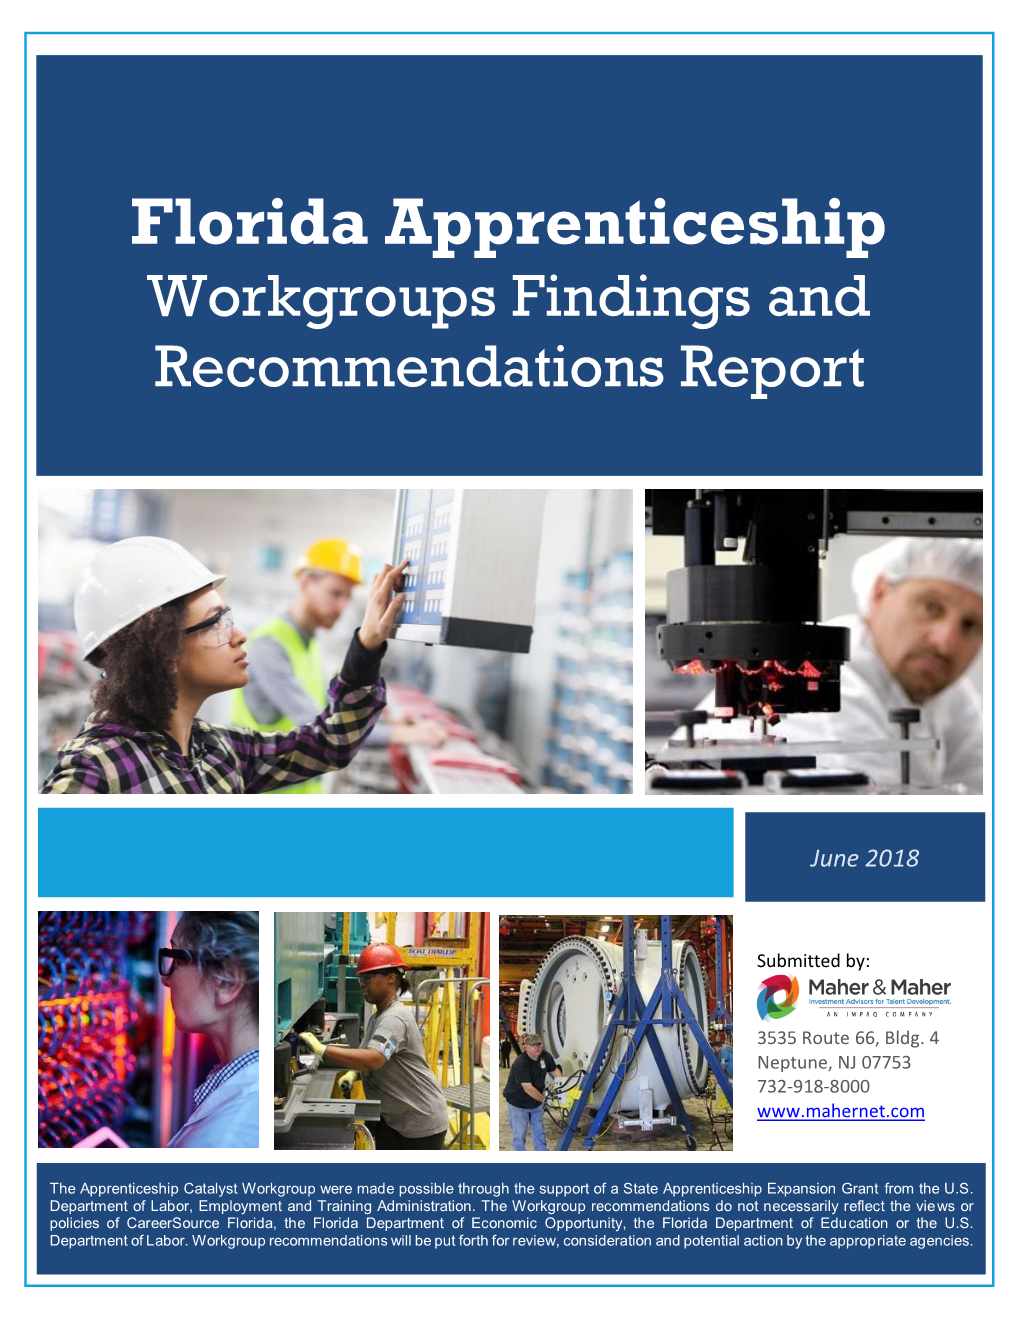 Florida Apprenticeship Workgroups Findings and Recommendations Report